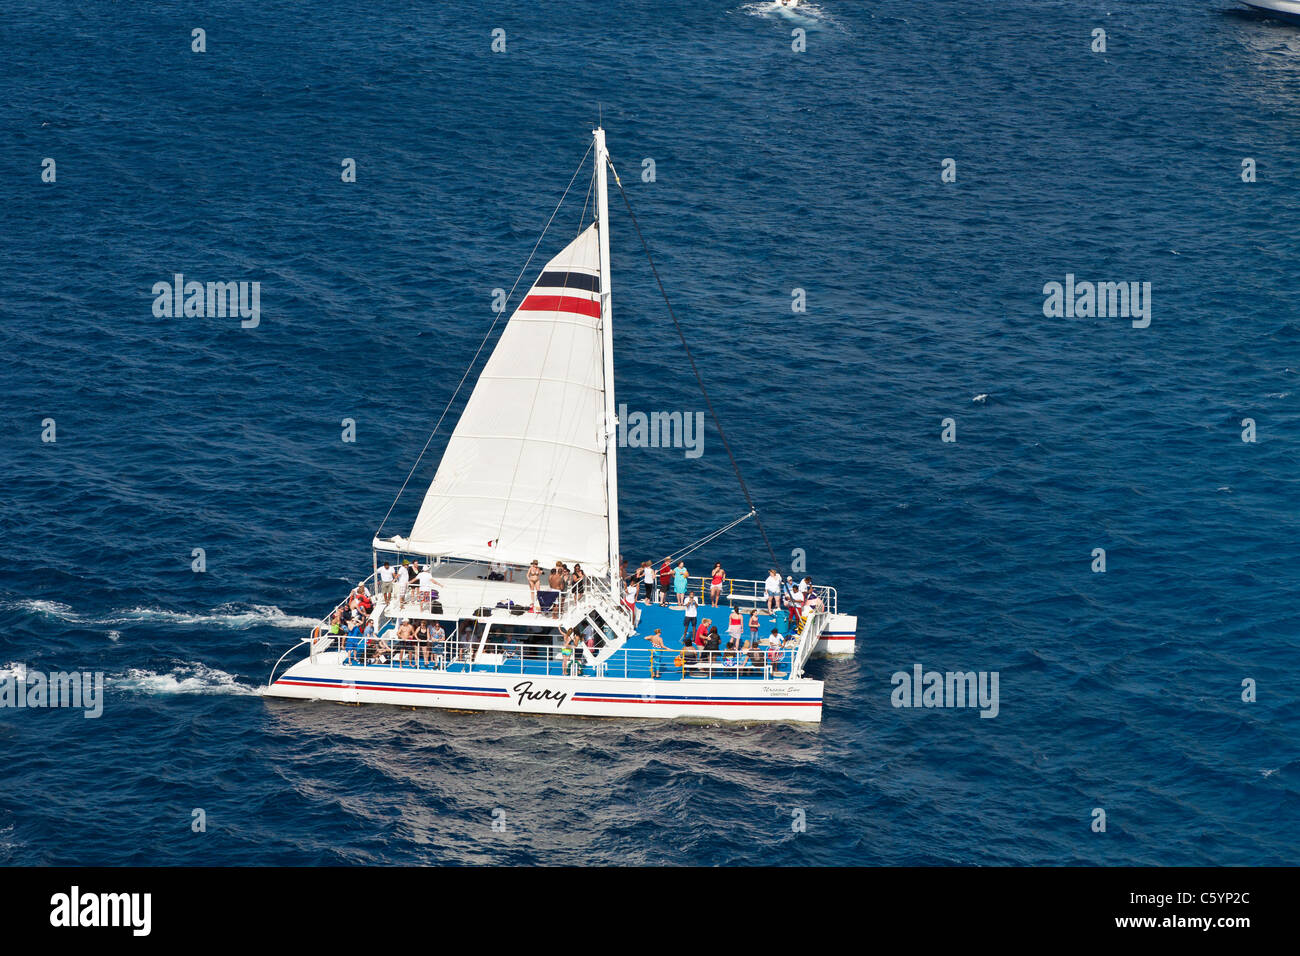 Sailing catamaran cruise excursion boat returns to dock in the Caribbean Sea off the coast of Cozumel, Mexico Stock Photo